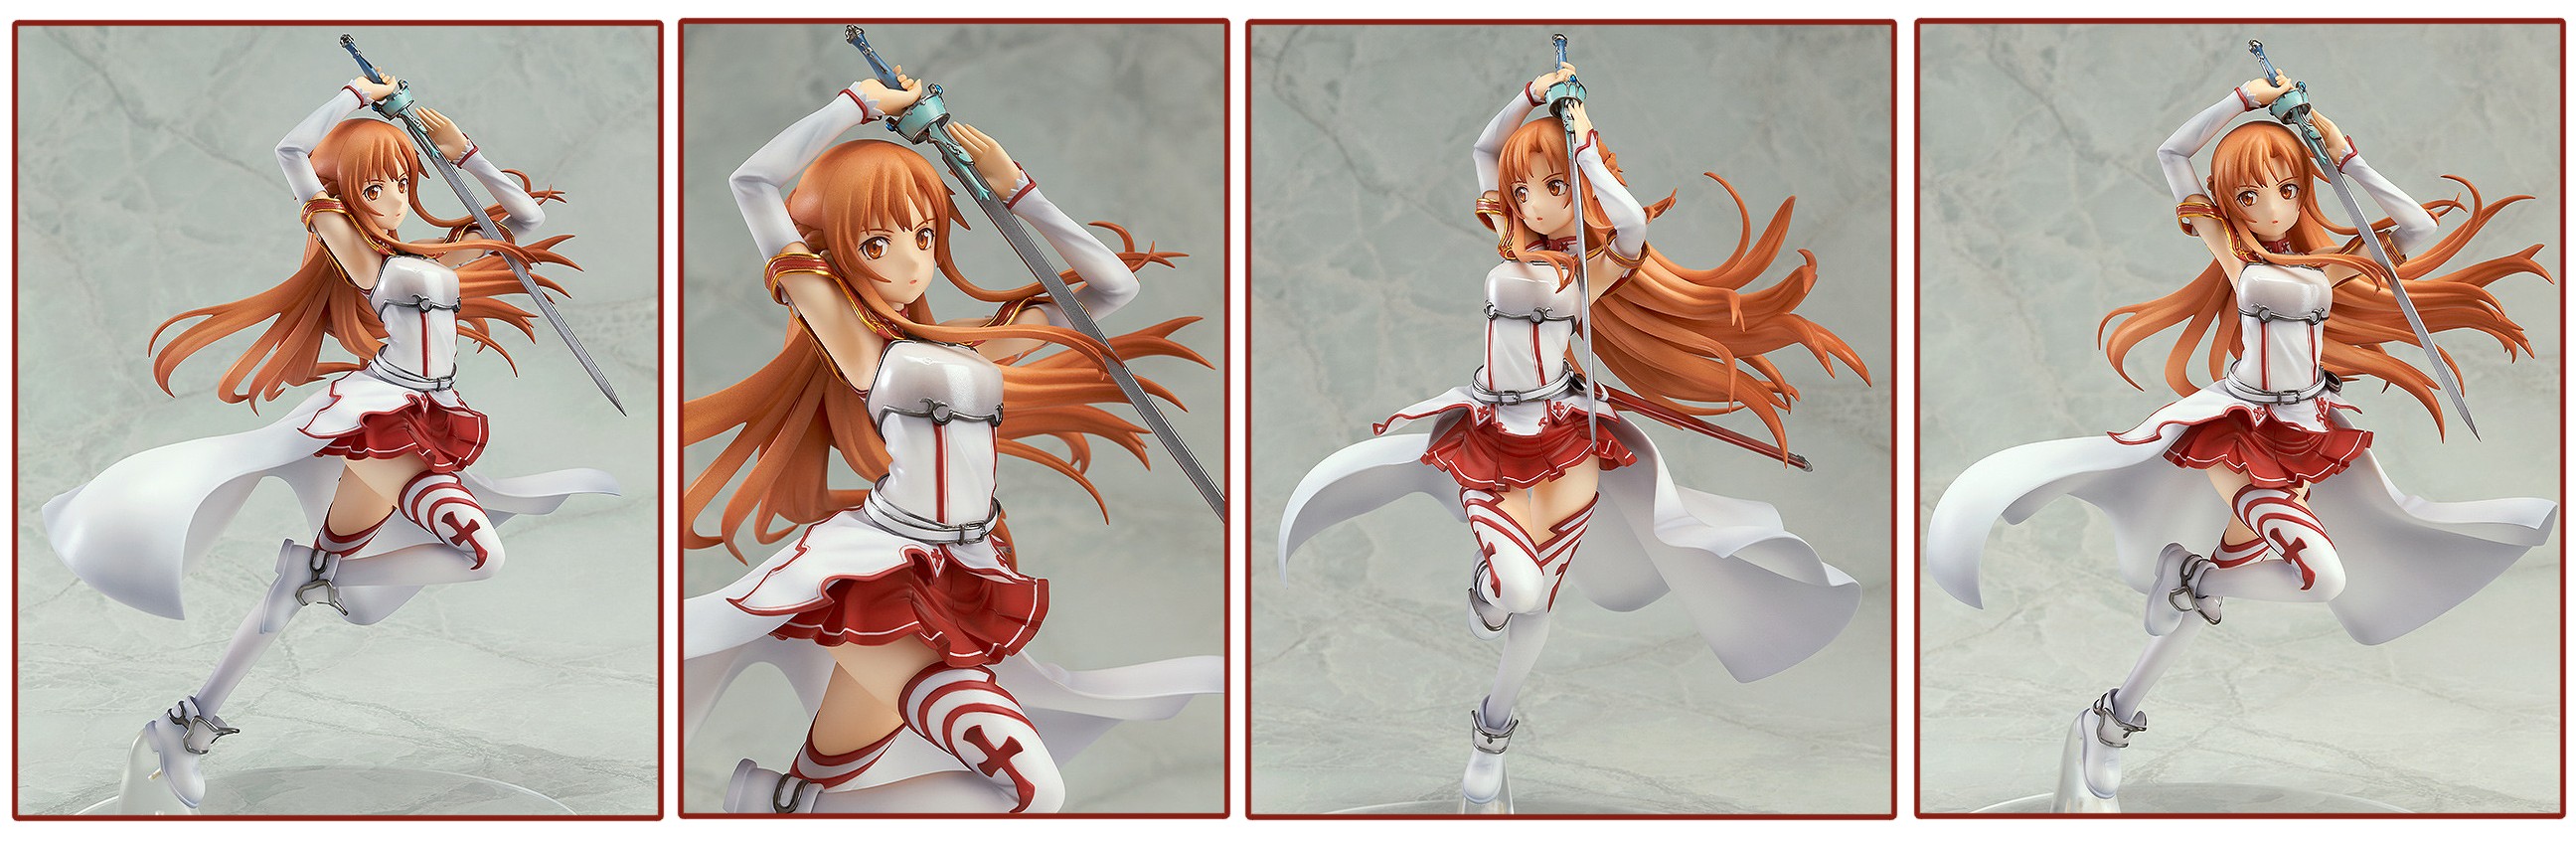 Good Smile Company – Sword Art Online Asuna 1 8, Knights of the Blood ver.